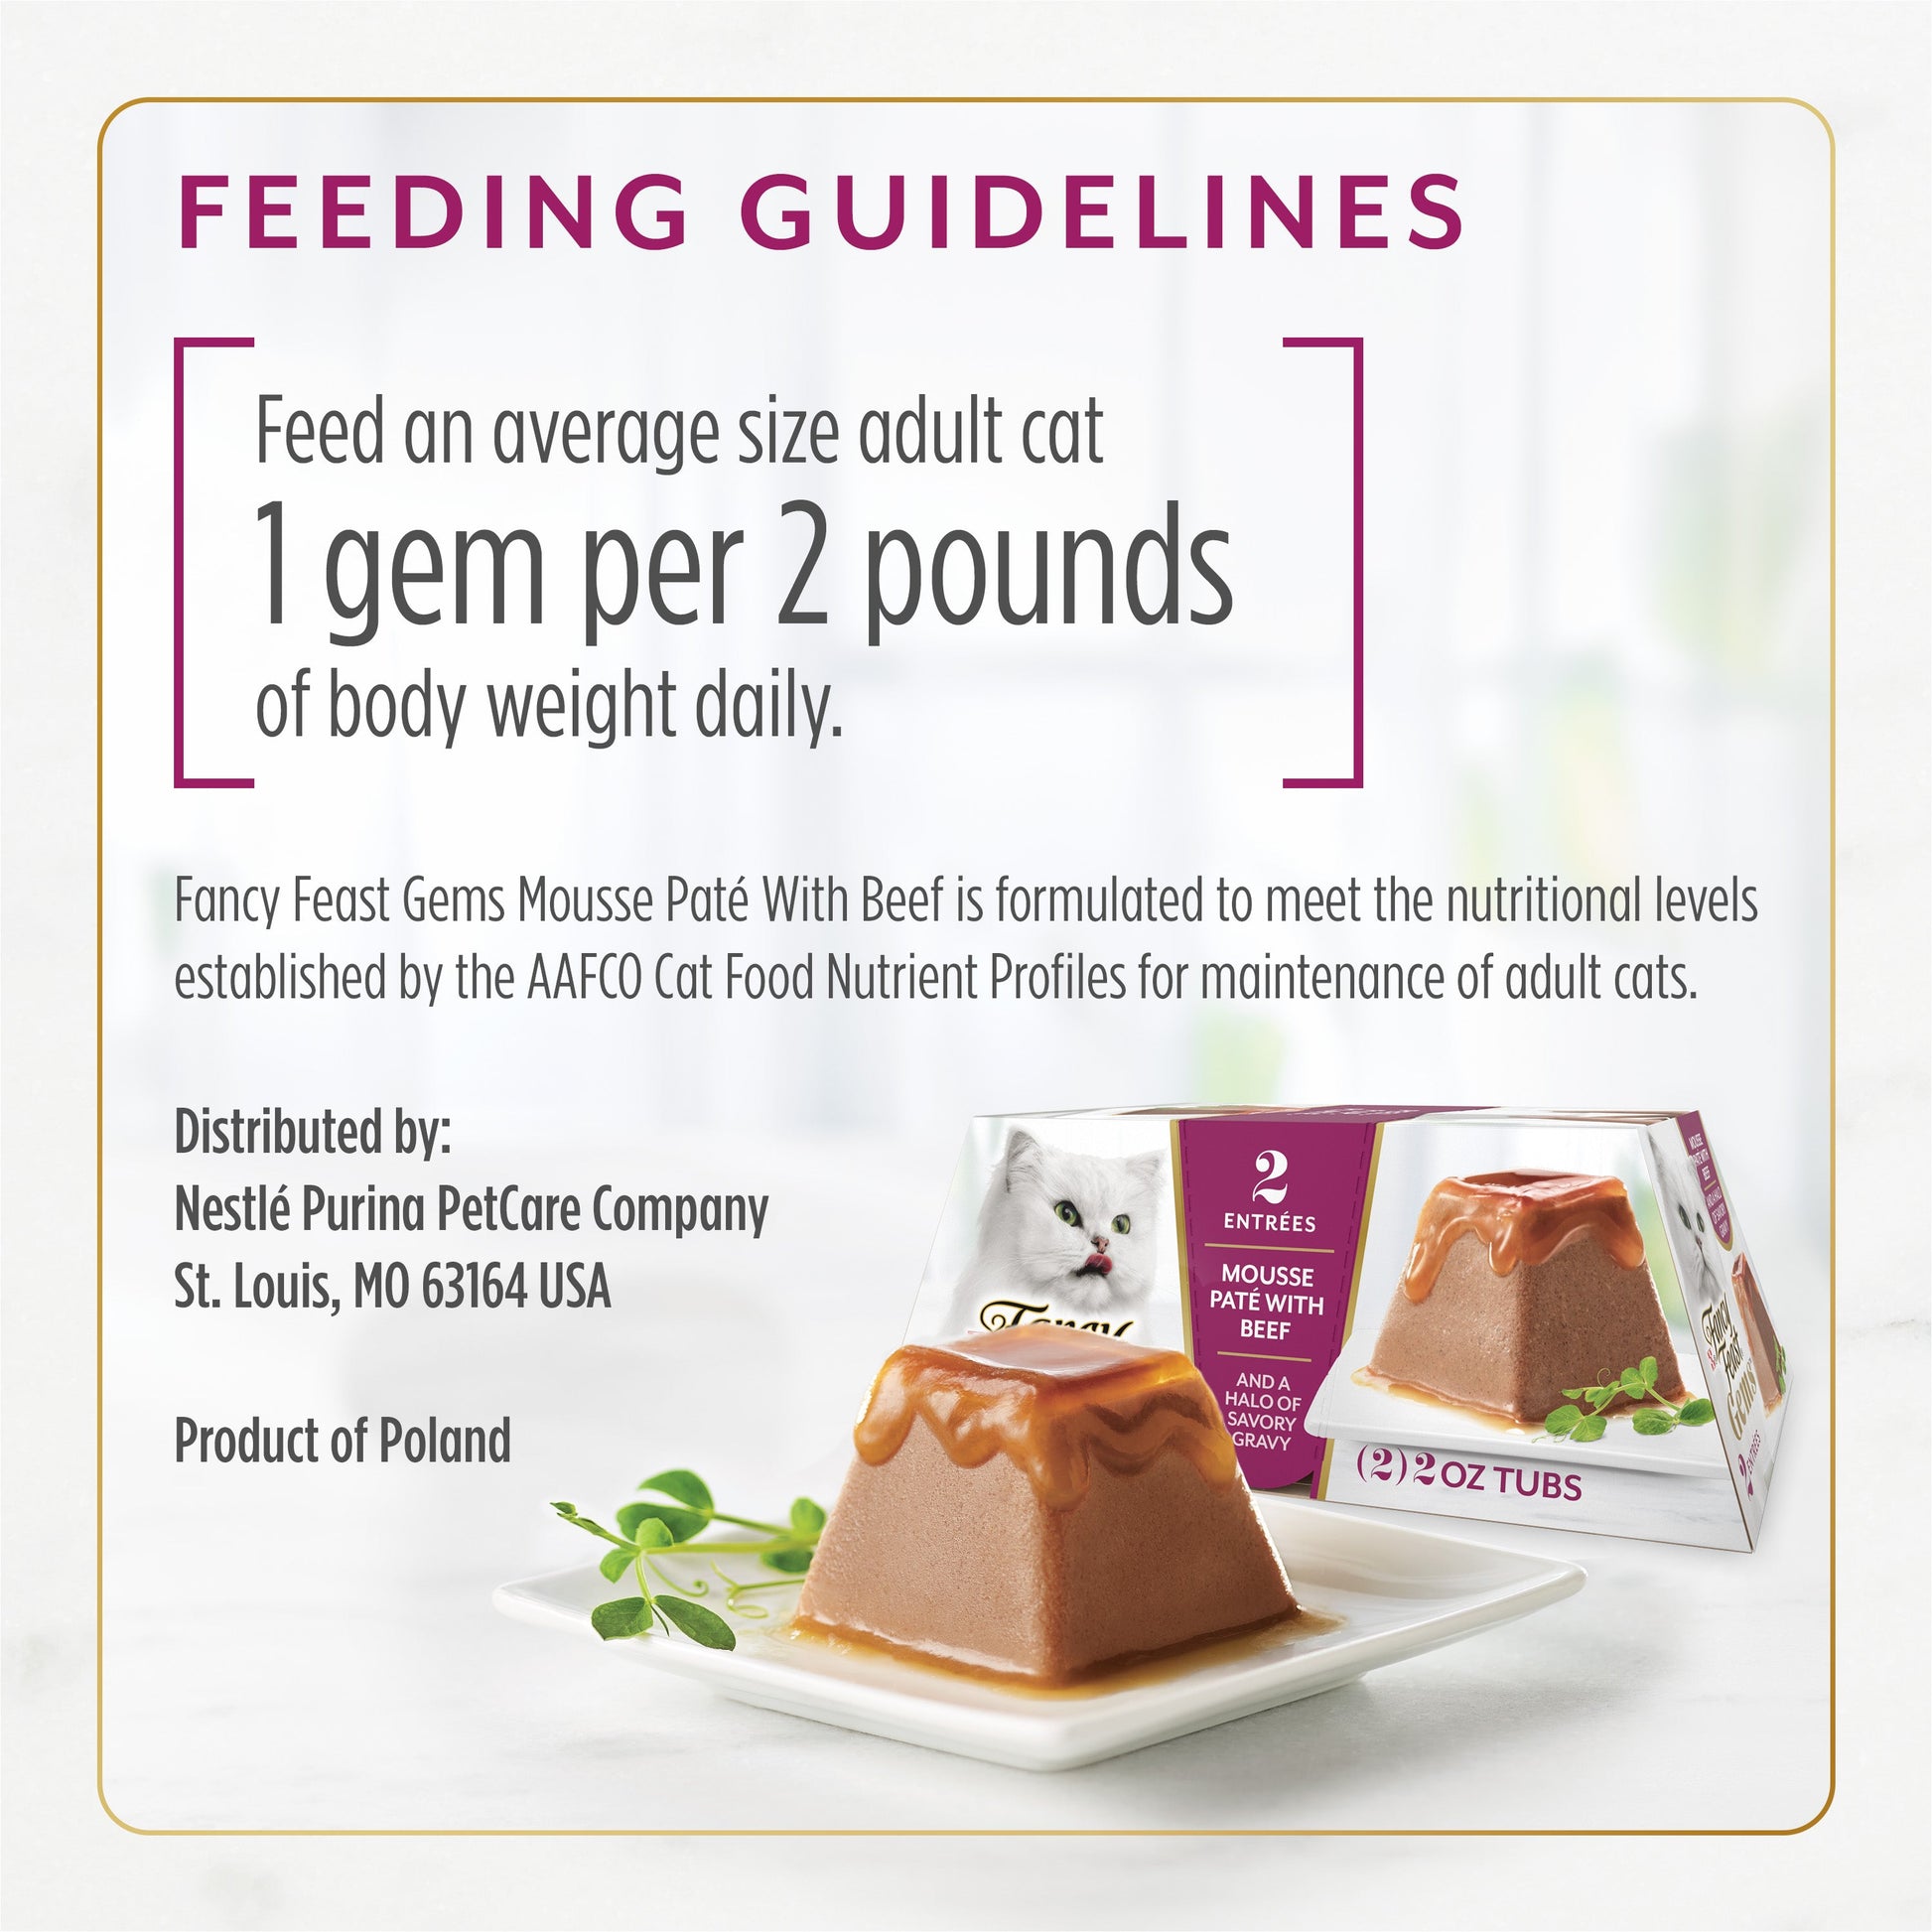 Fancy Feast Gems Mousse Pate with Beef feeding guidelines